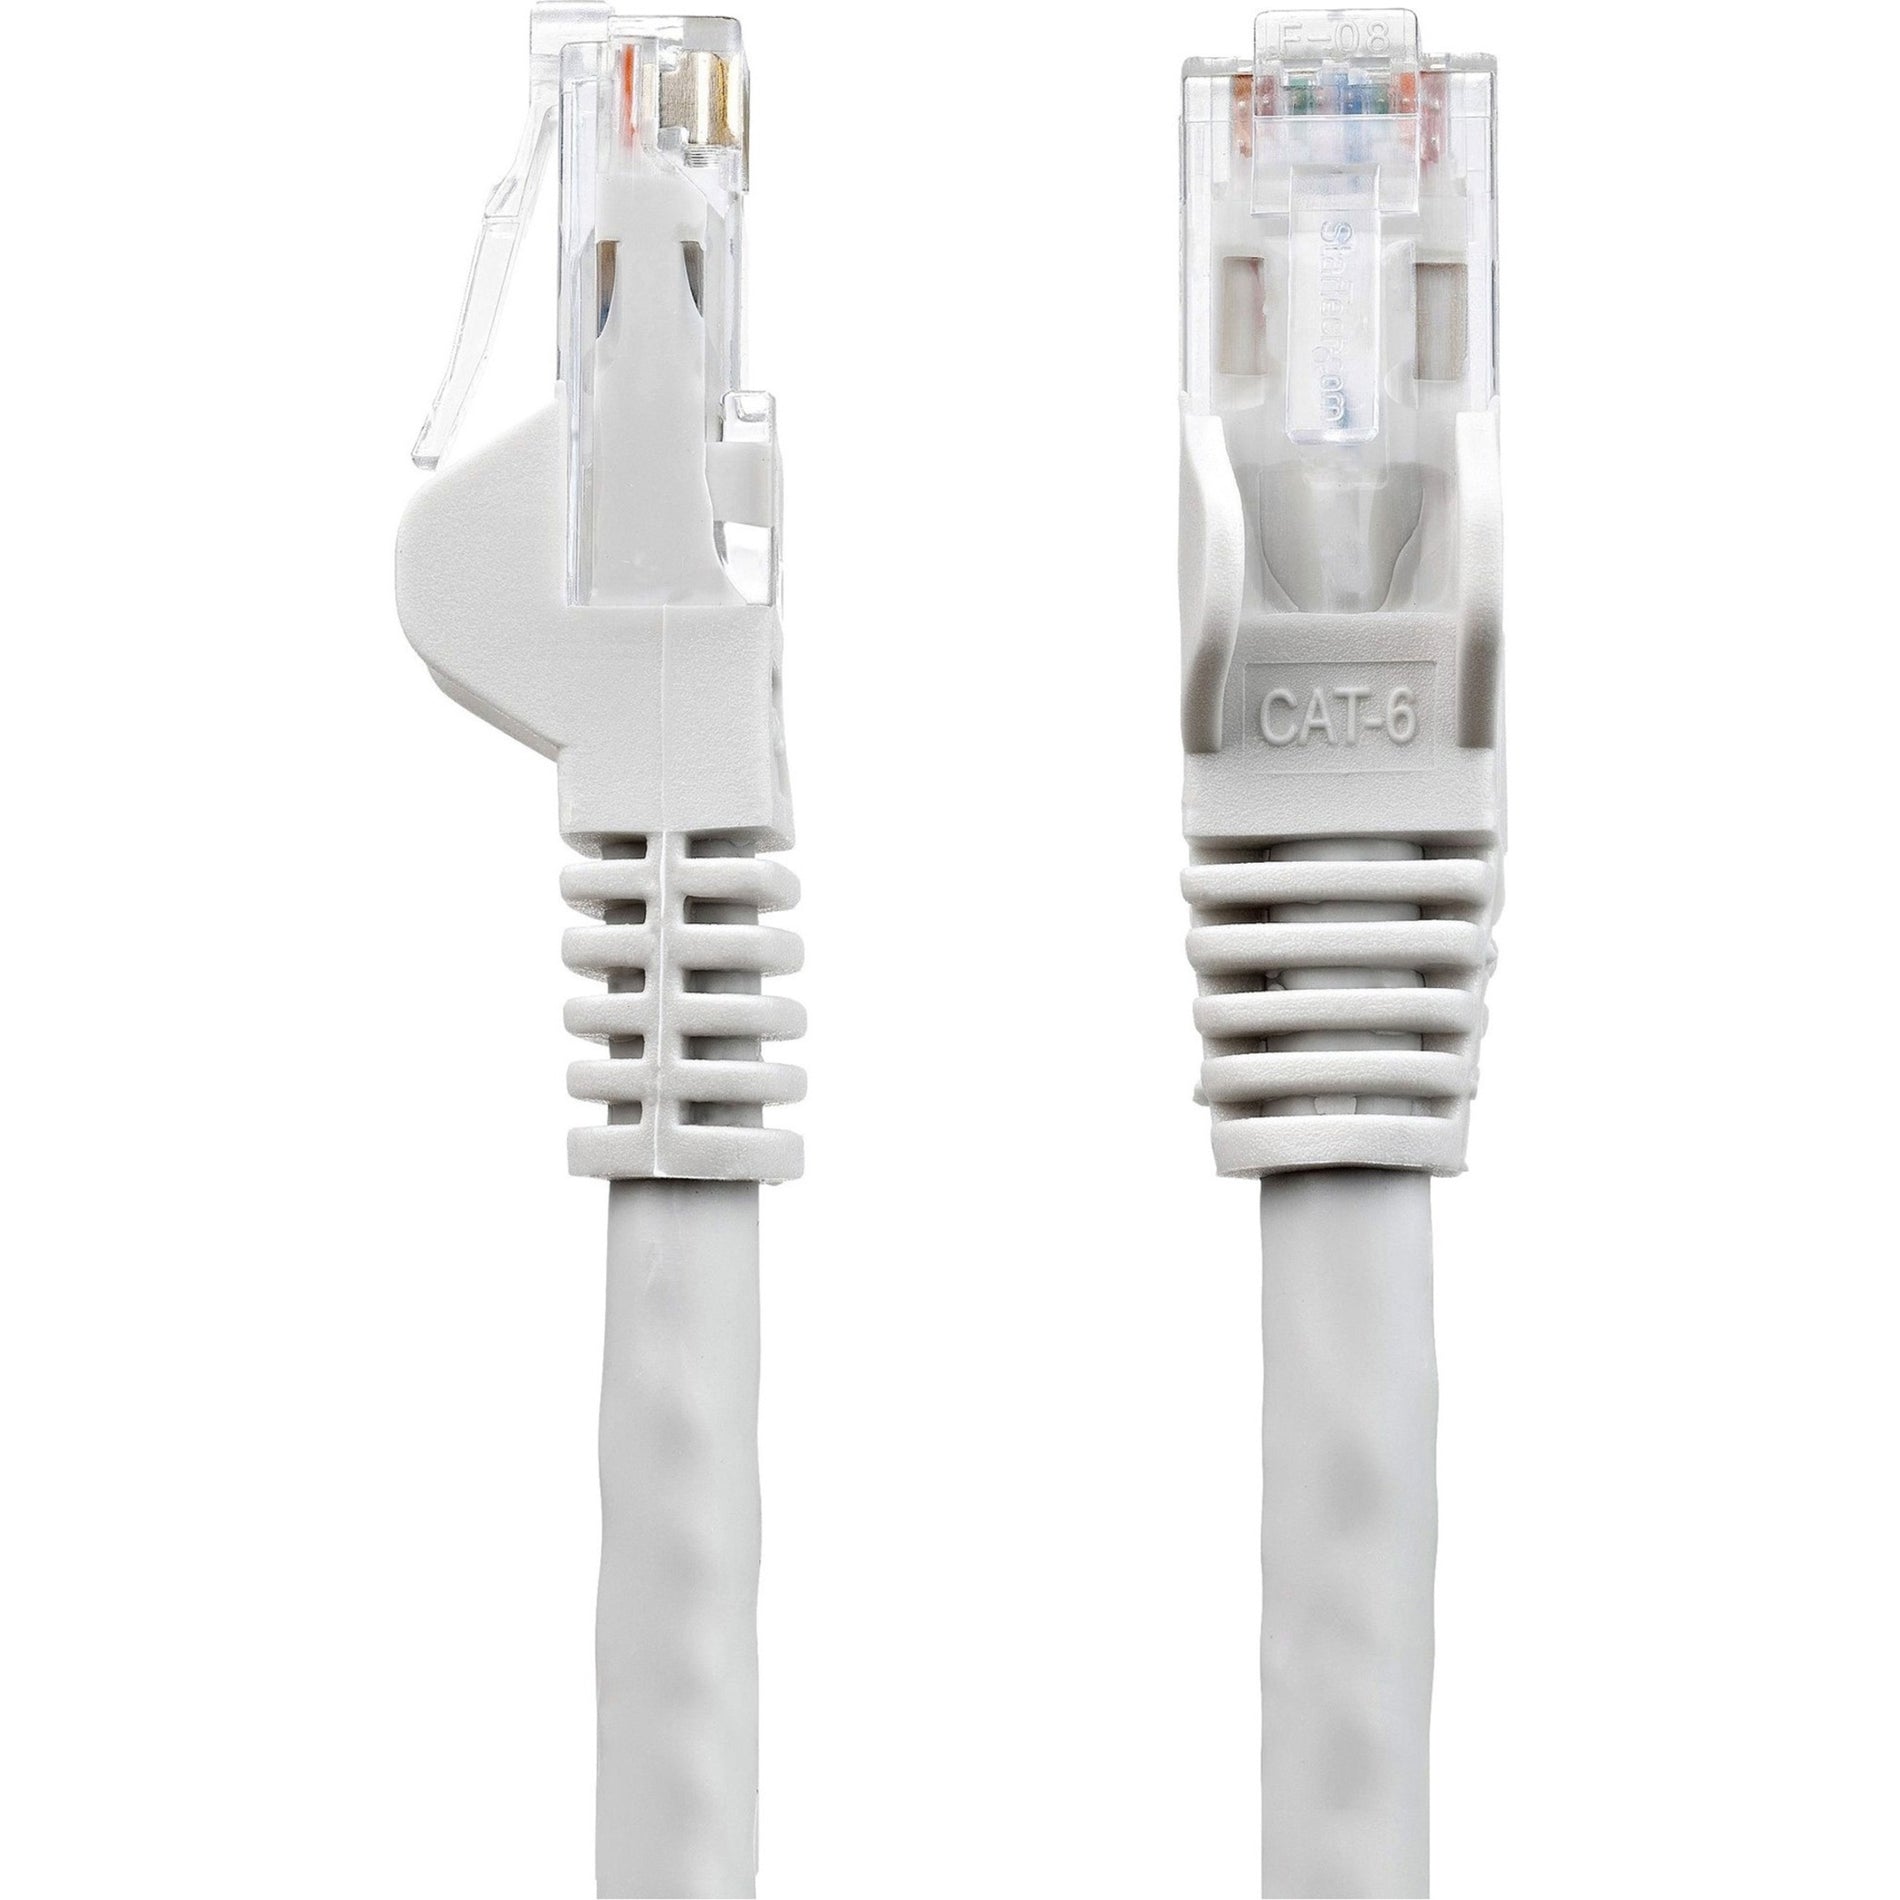 StarTech.com N6PATCH6INGR Cat6 Patch Cable, 6in Gray, Snagless RJ45 Connectors